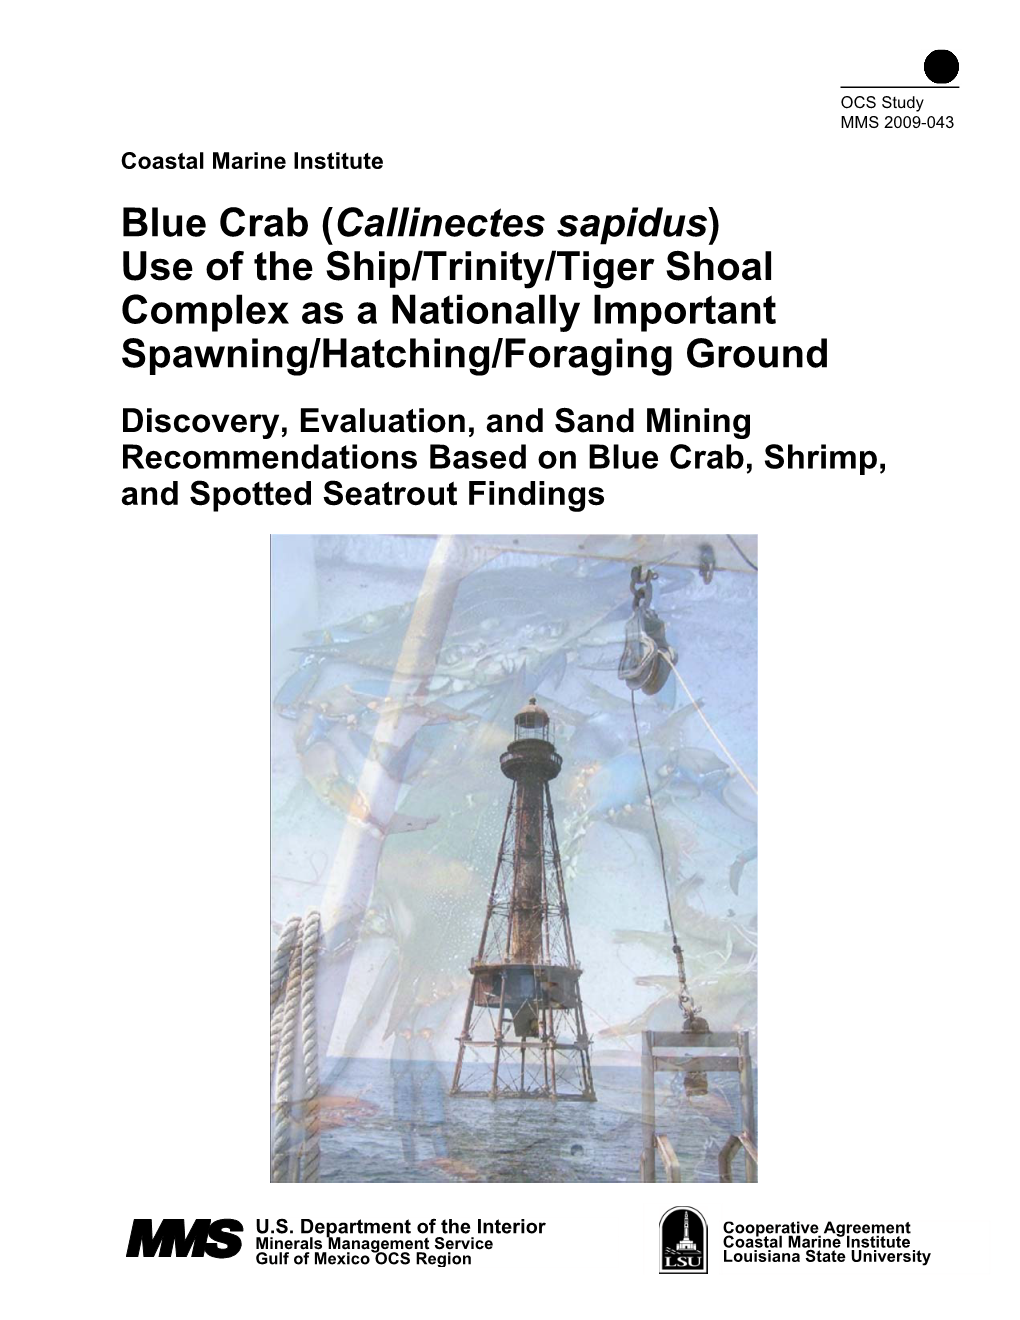 Blue Crab (Callinectes Sapidus) Use of the Ship/Trinity/Tiger Shoal Complex As a Nationally Important Spawning/Hatching/Foraging Ground